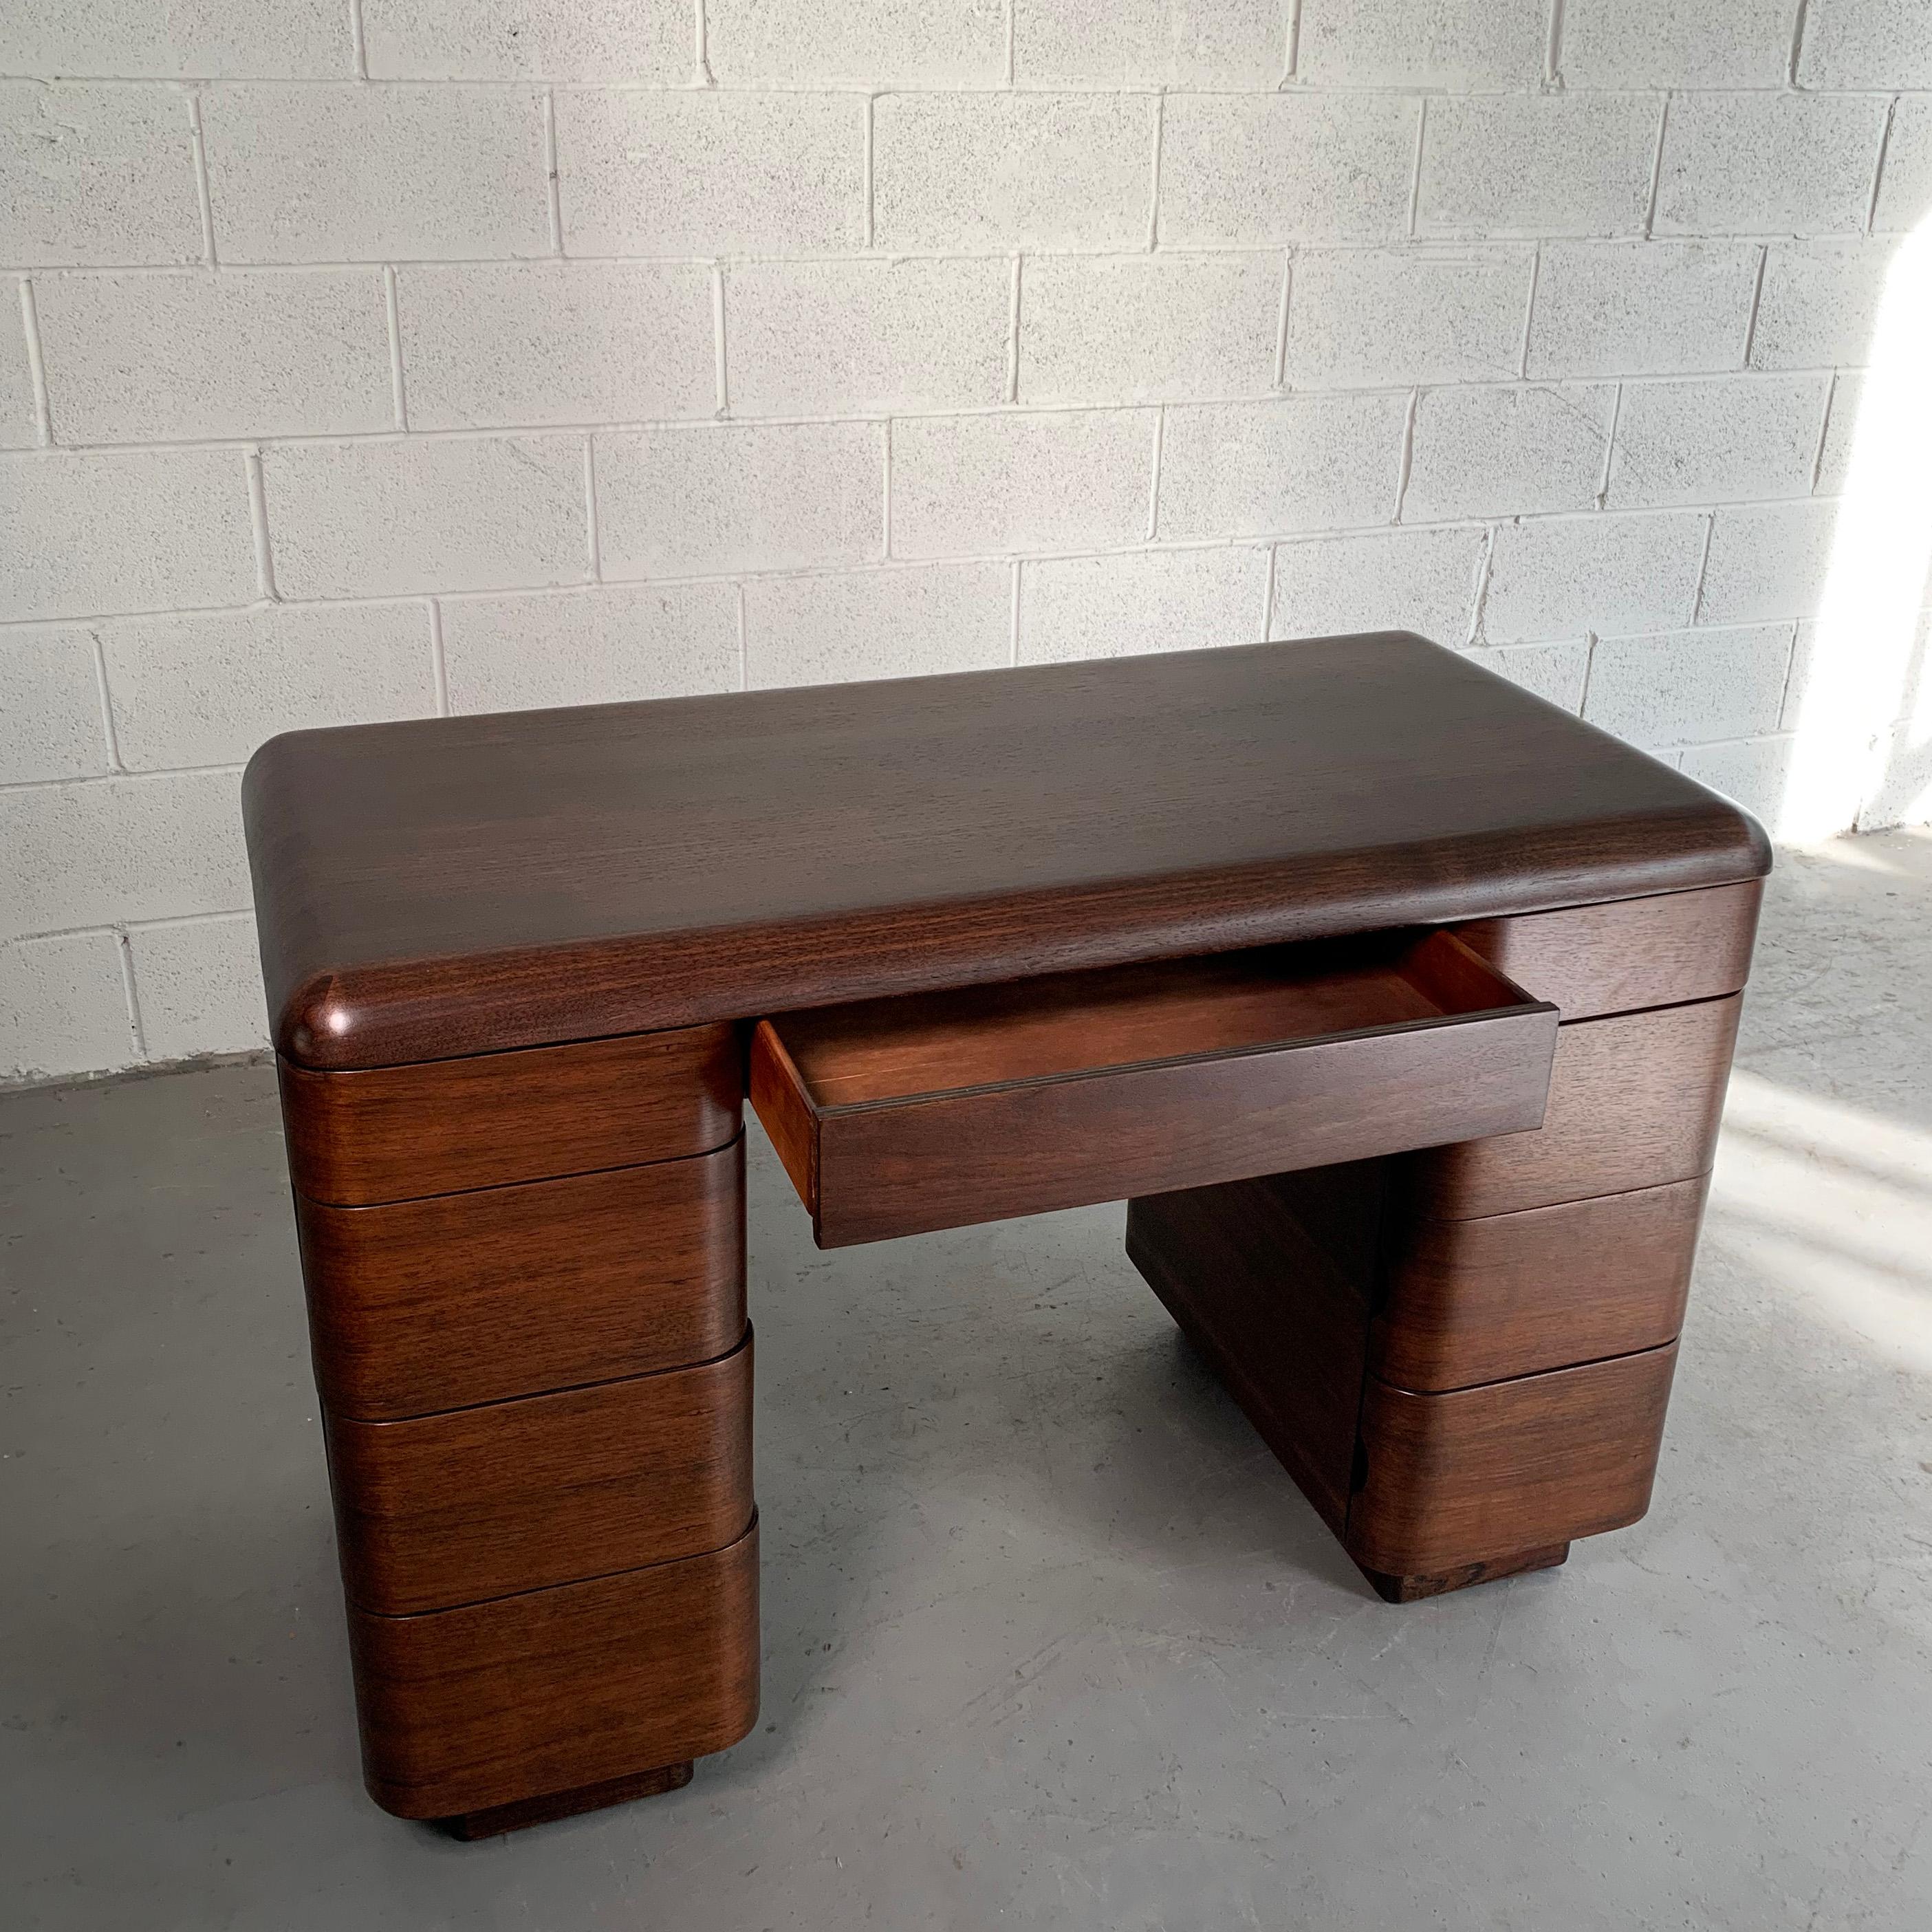 20th Century Bentwood Desk by Paul Goldman for Plymodern